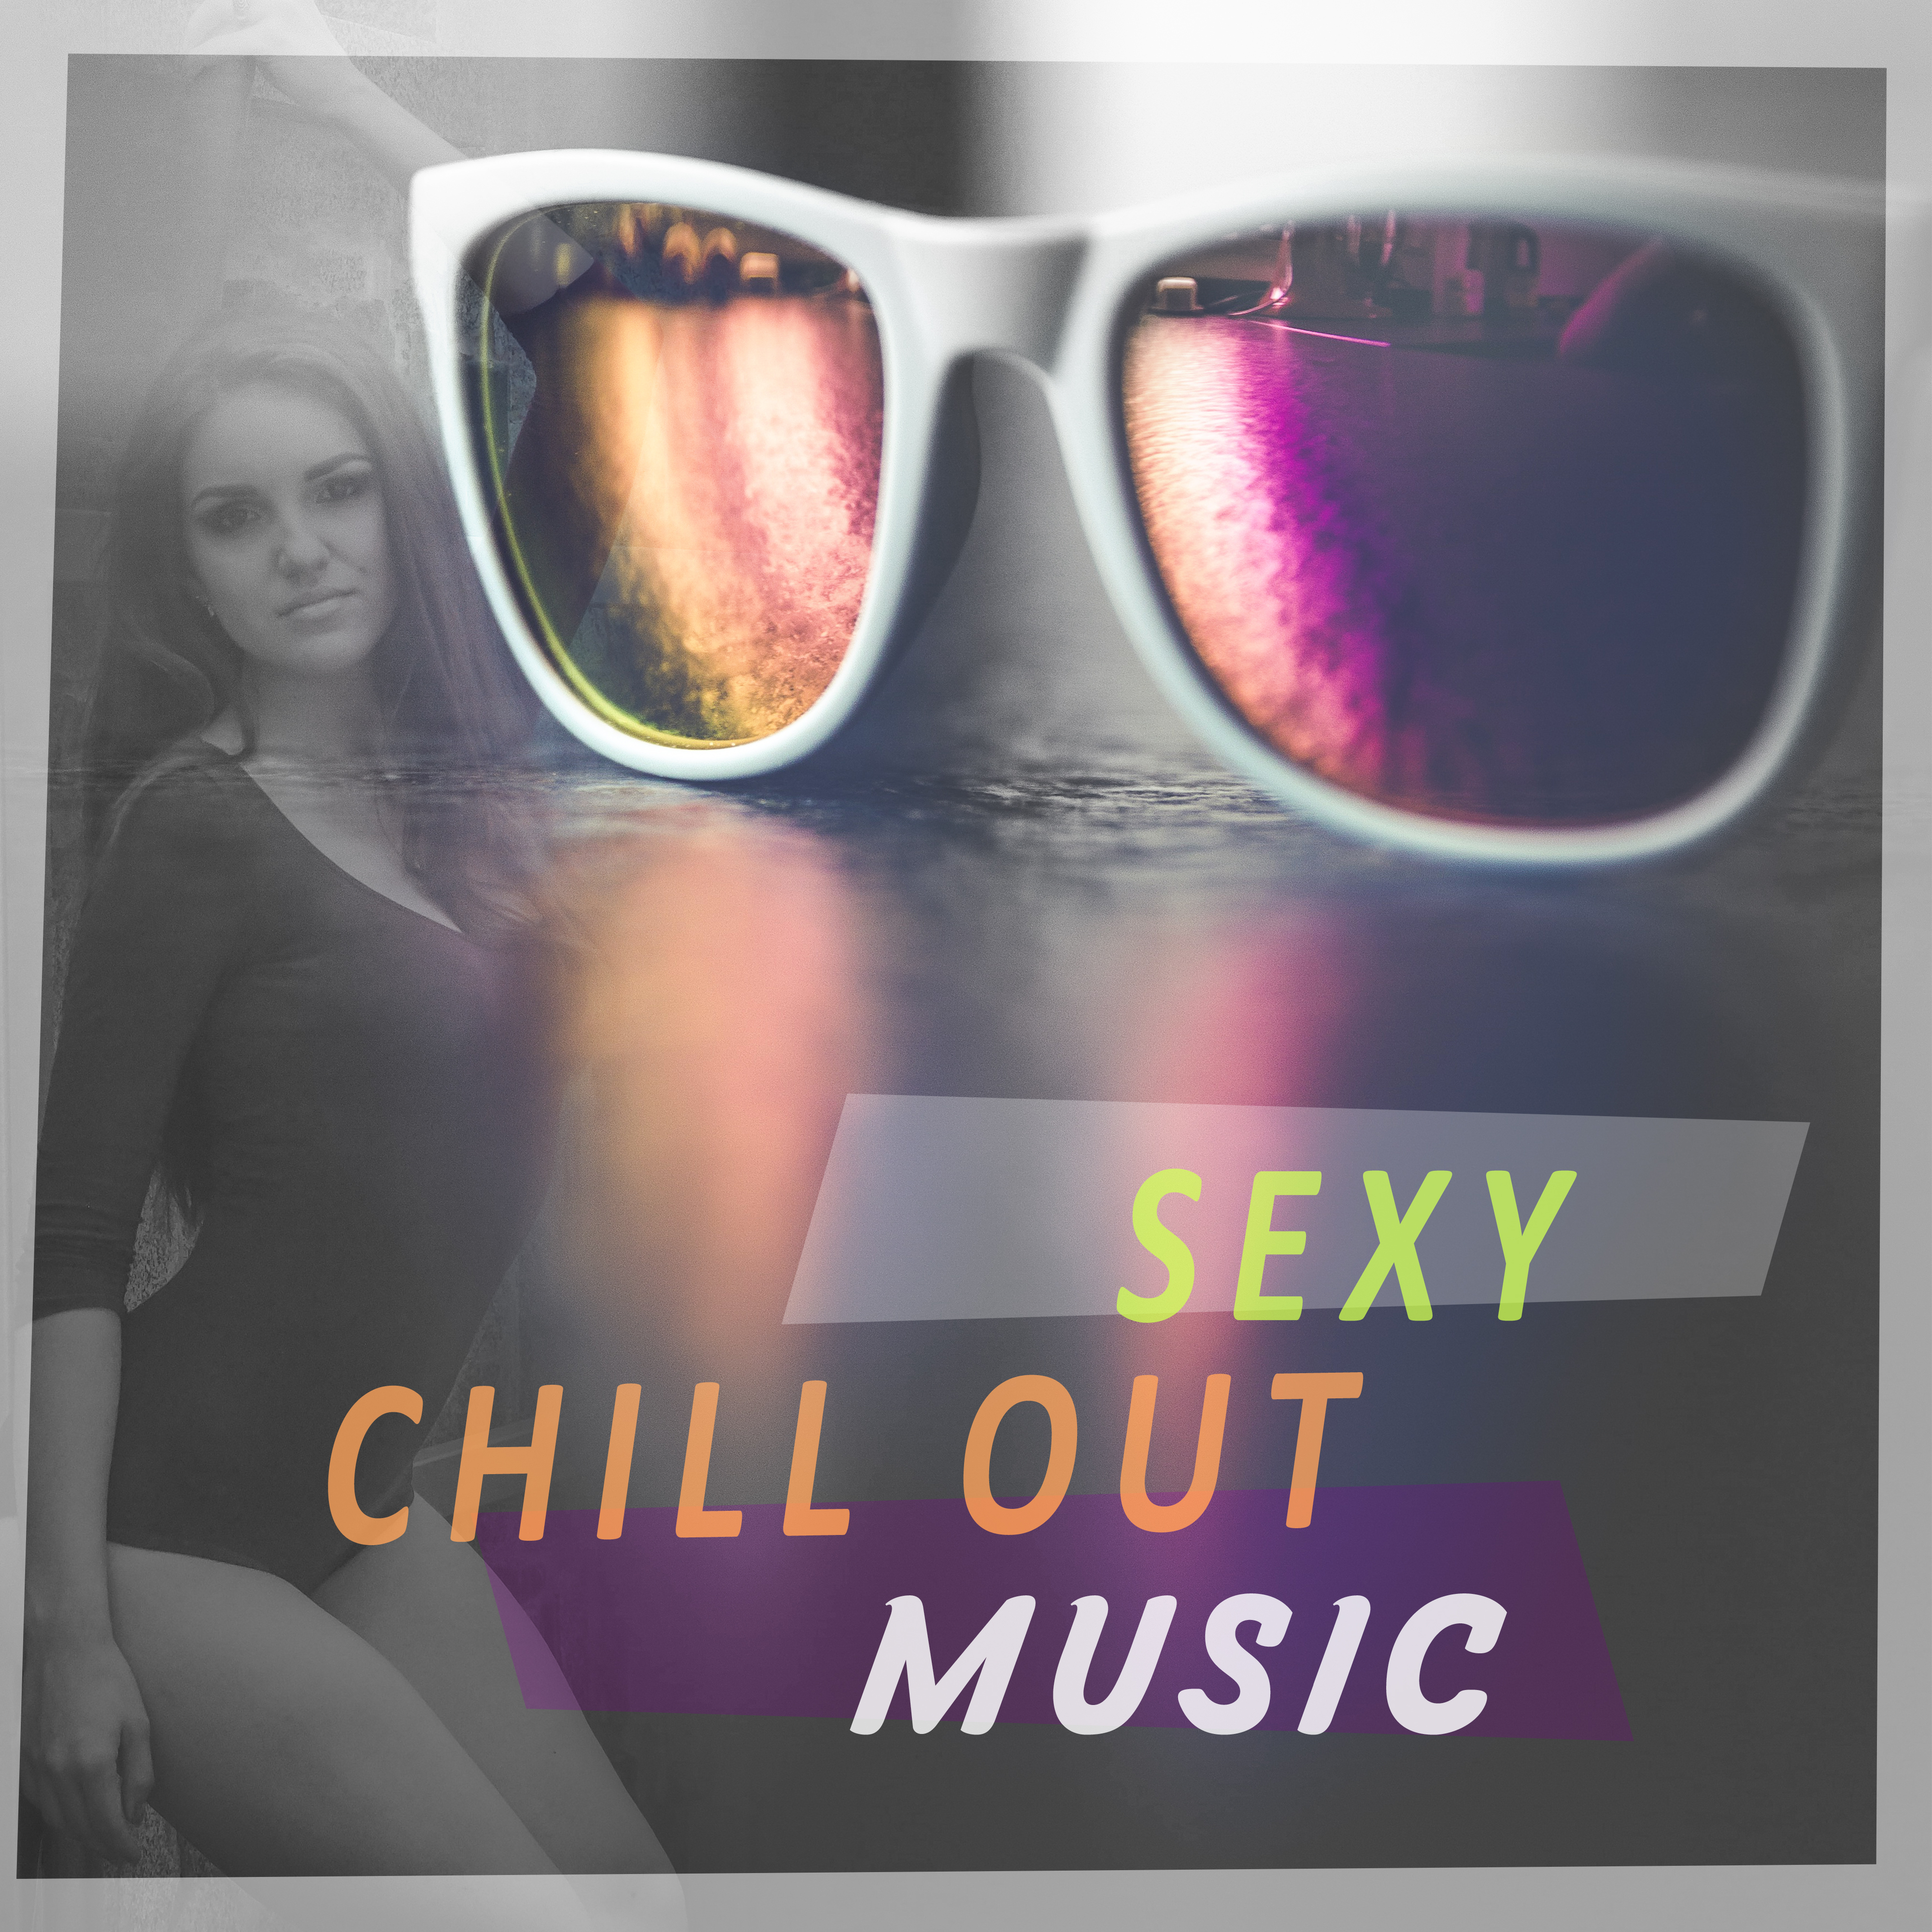 **** Chill Out Music - Erotic Lounge, **** Moves, Sensual Dance, Chillout Music